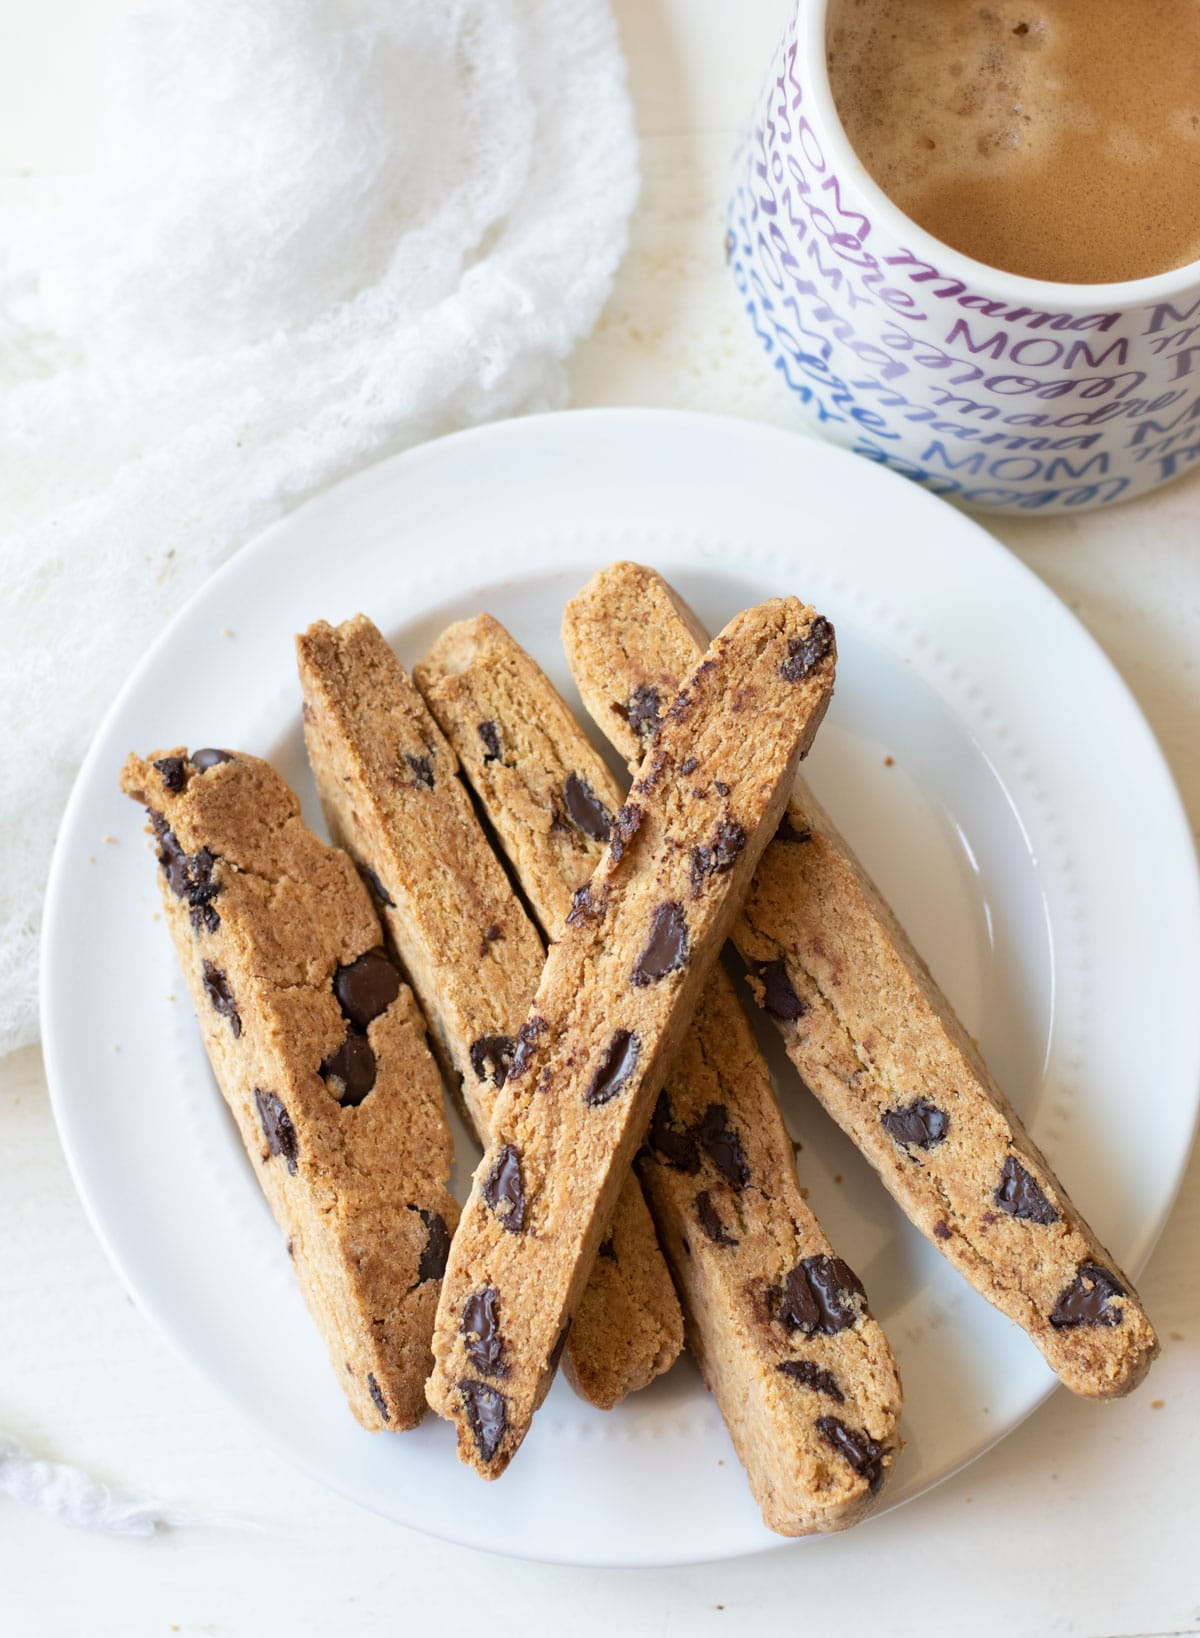 the featured image of a plate of gluten free chocolate chip biscotti